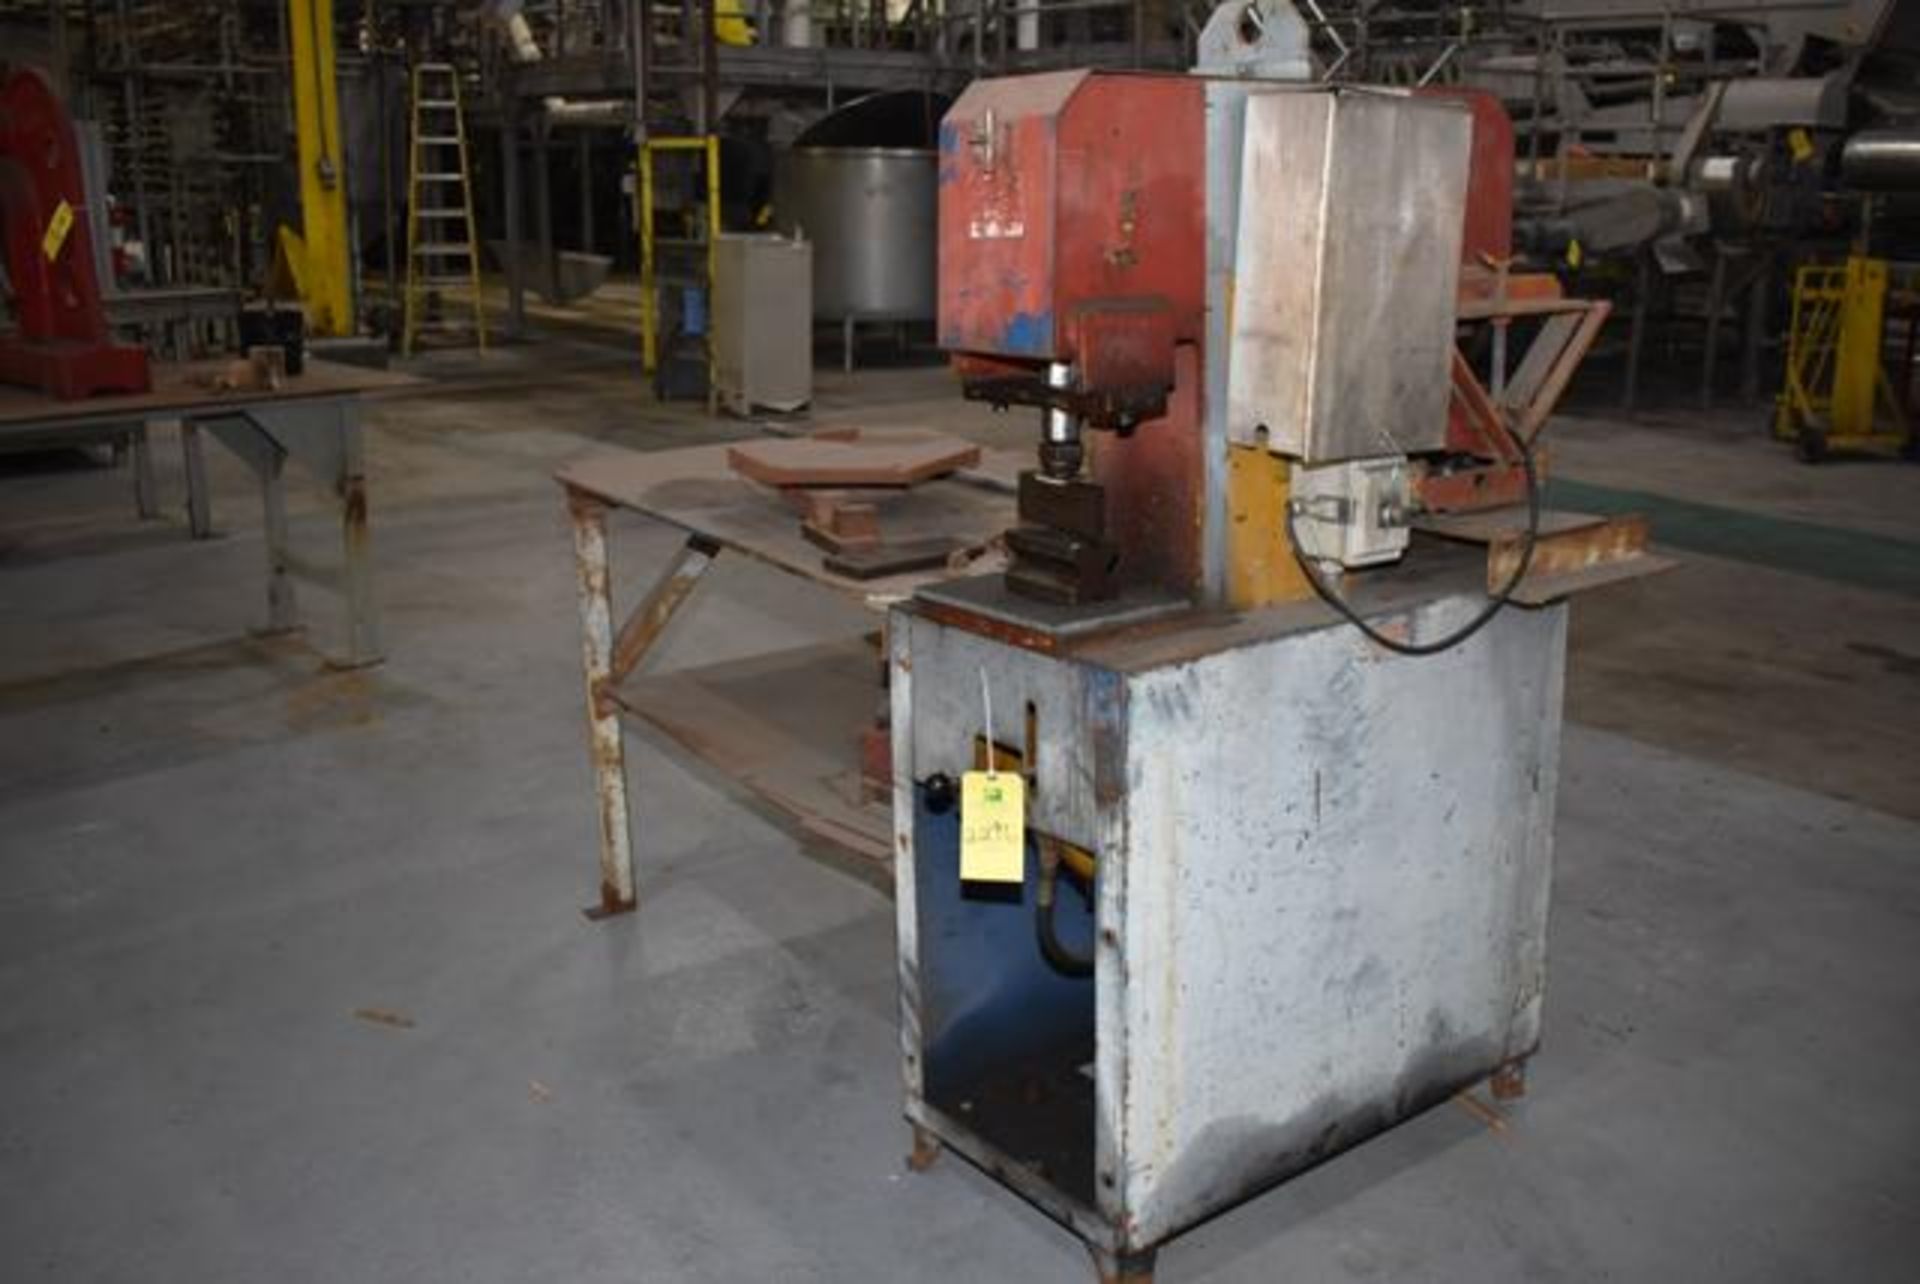 Springwater Model 30/30 Ironworker, Rated 30 Ton Punch, Press Brake Tooling, Steel Table